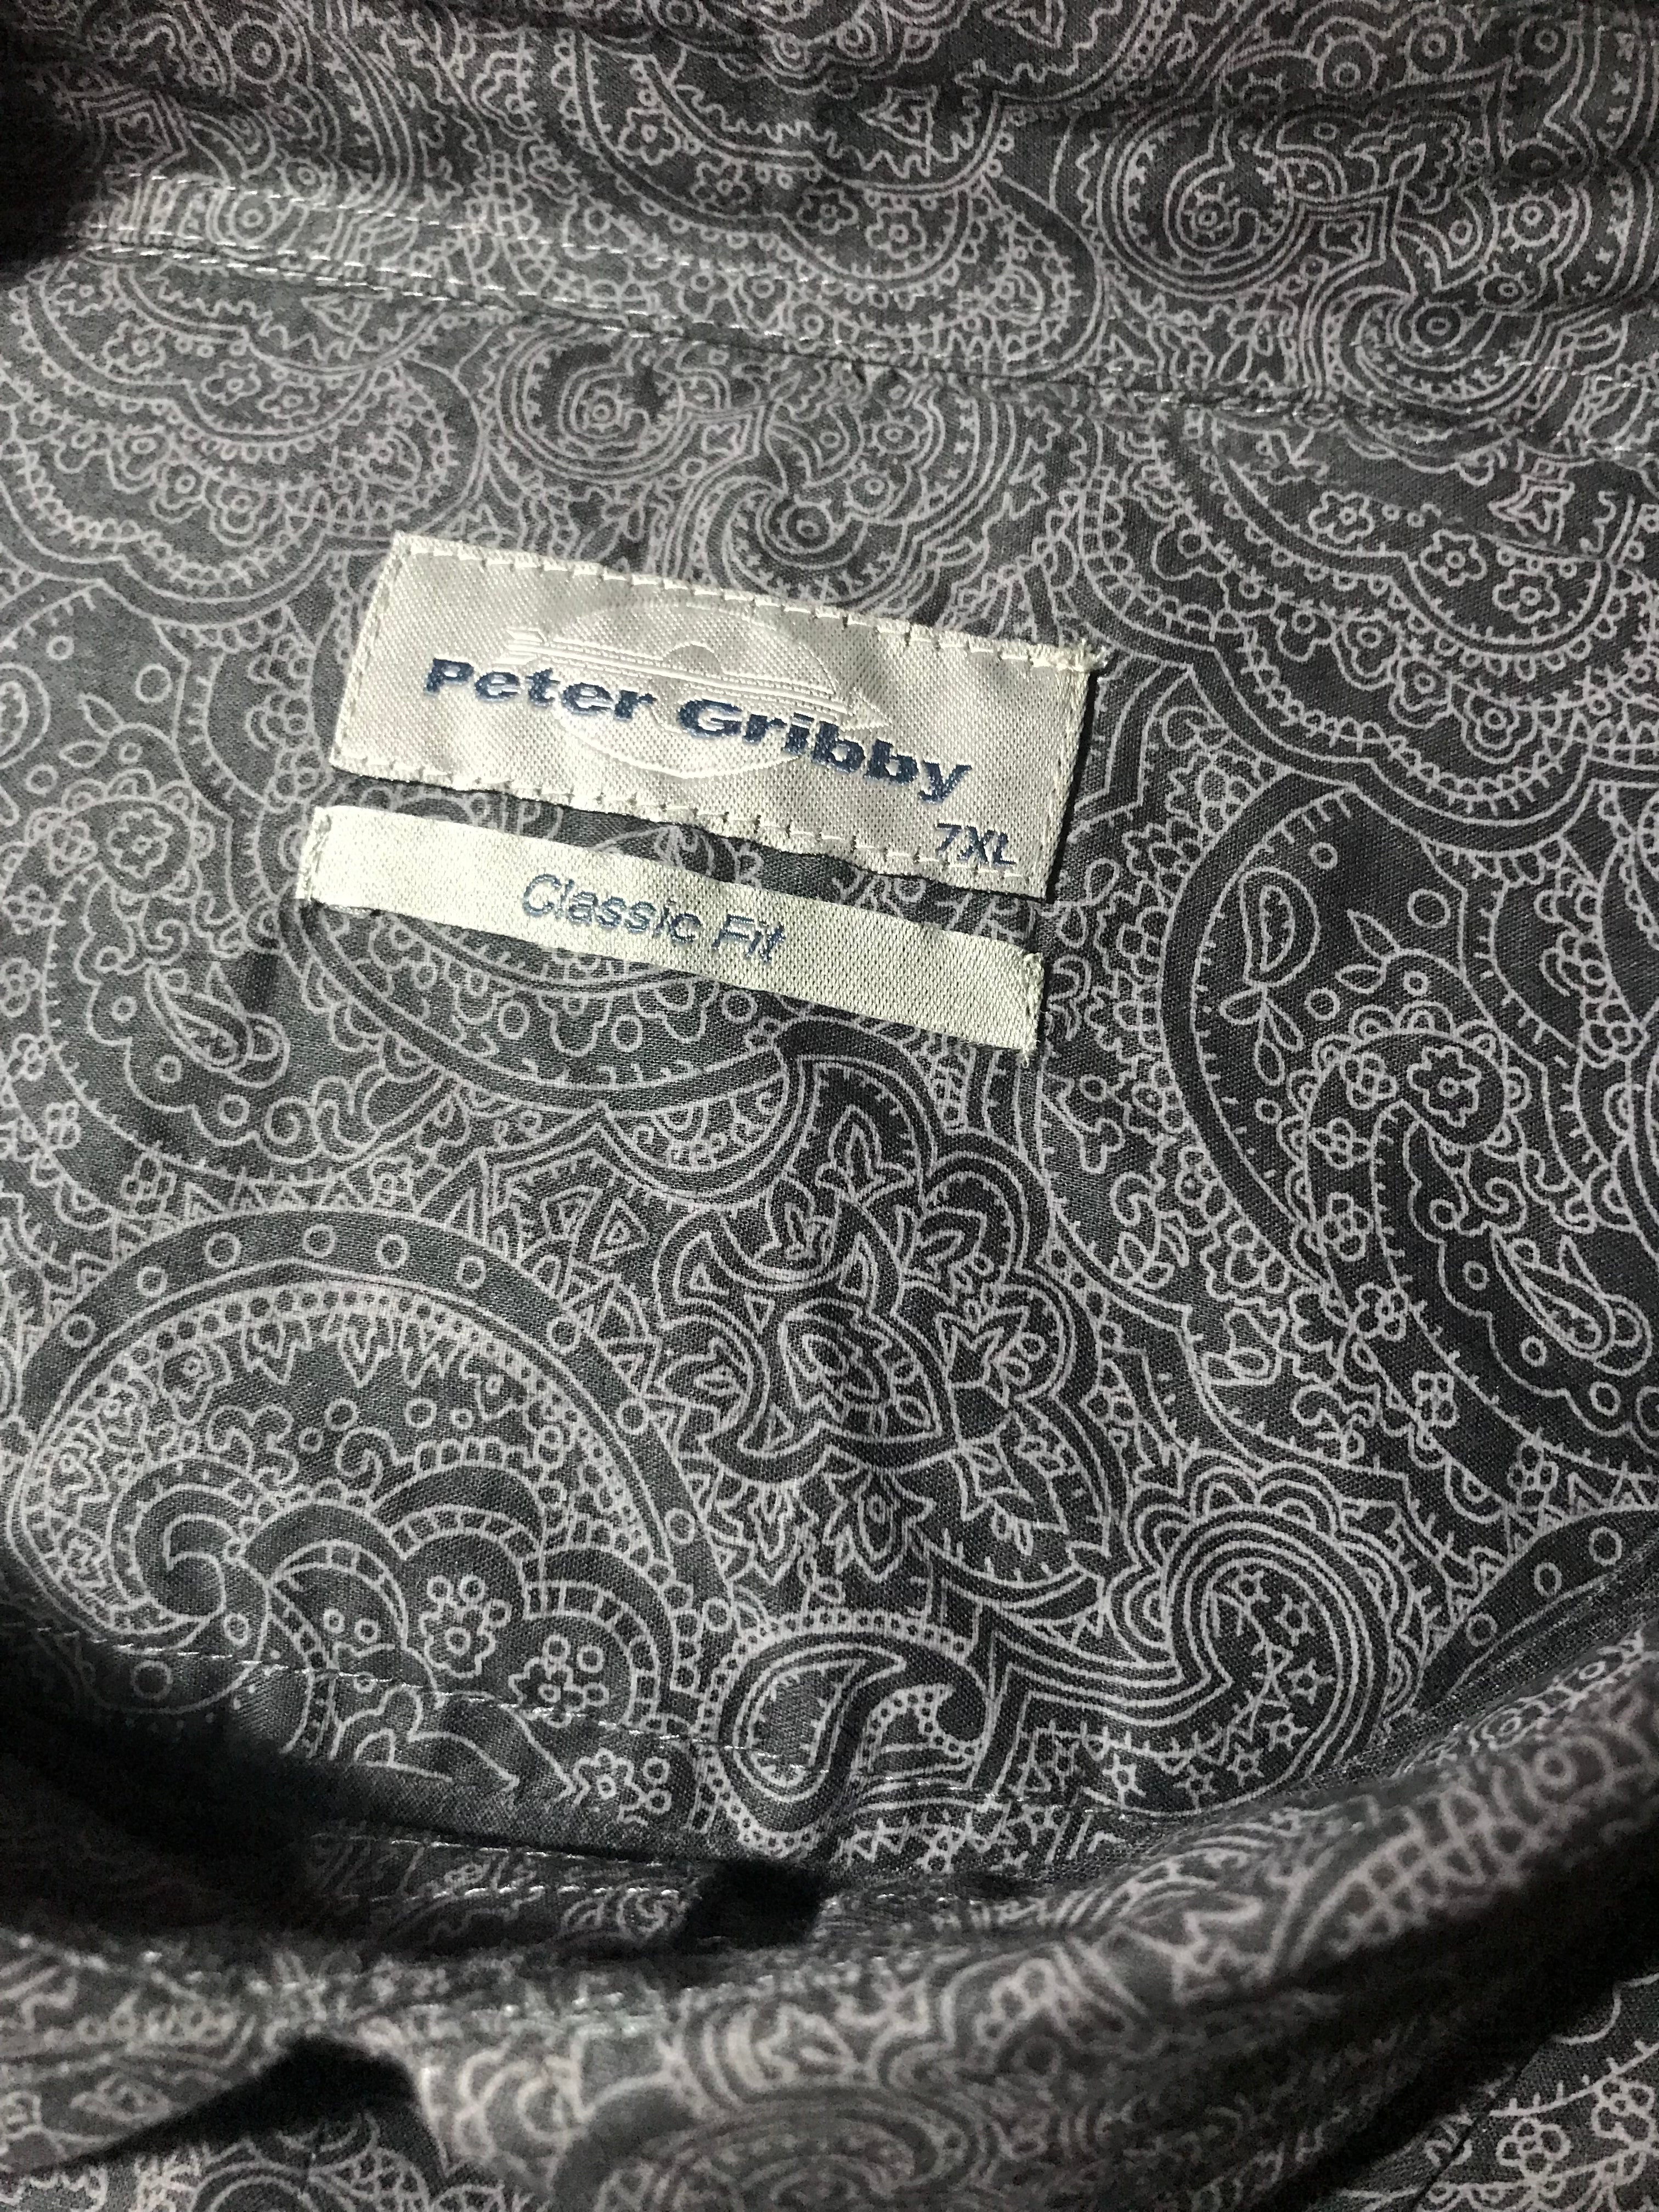 Peter Gribby King-Size Charcoal Paisley Patterned Men's Shirt